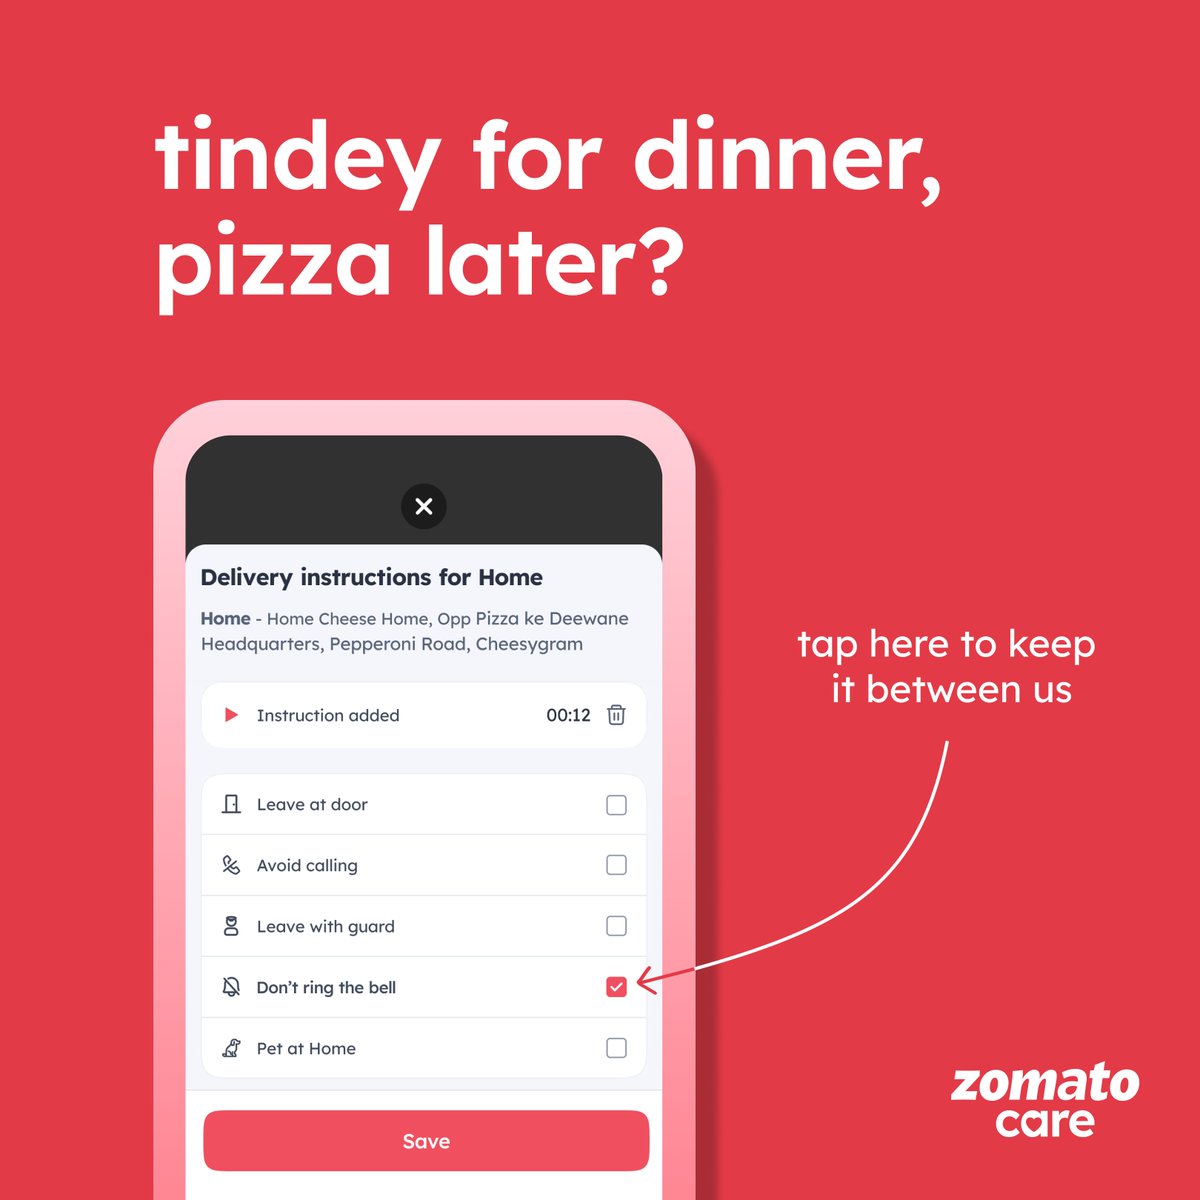 Keep your late-night cravings a secret with the 'Don't ring the bell' option. #zomatocare